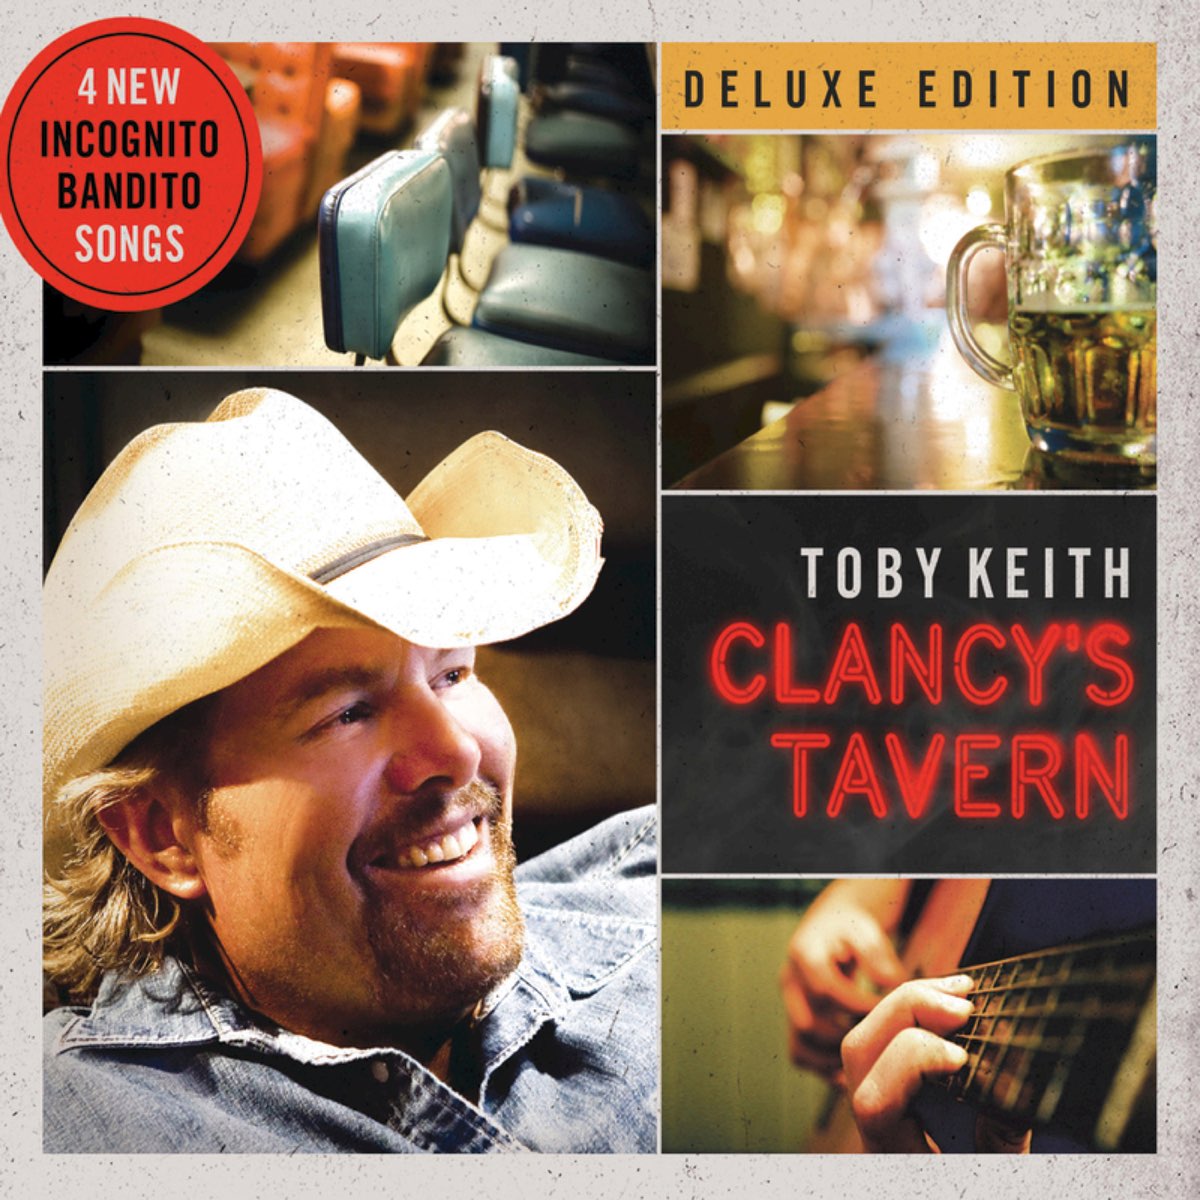 ‎Clancy's Tavern by Toby Keith on Apple Music